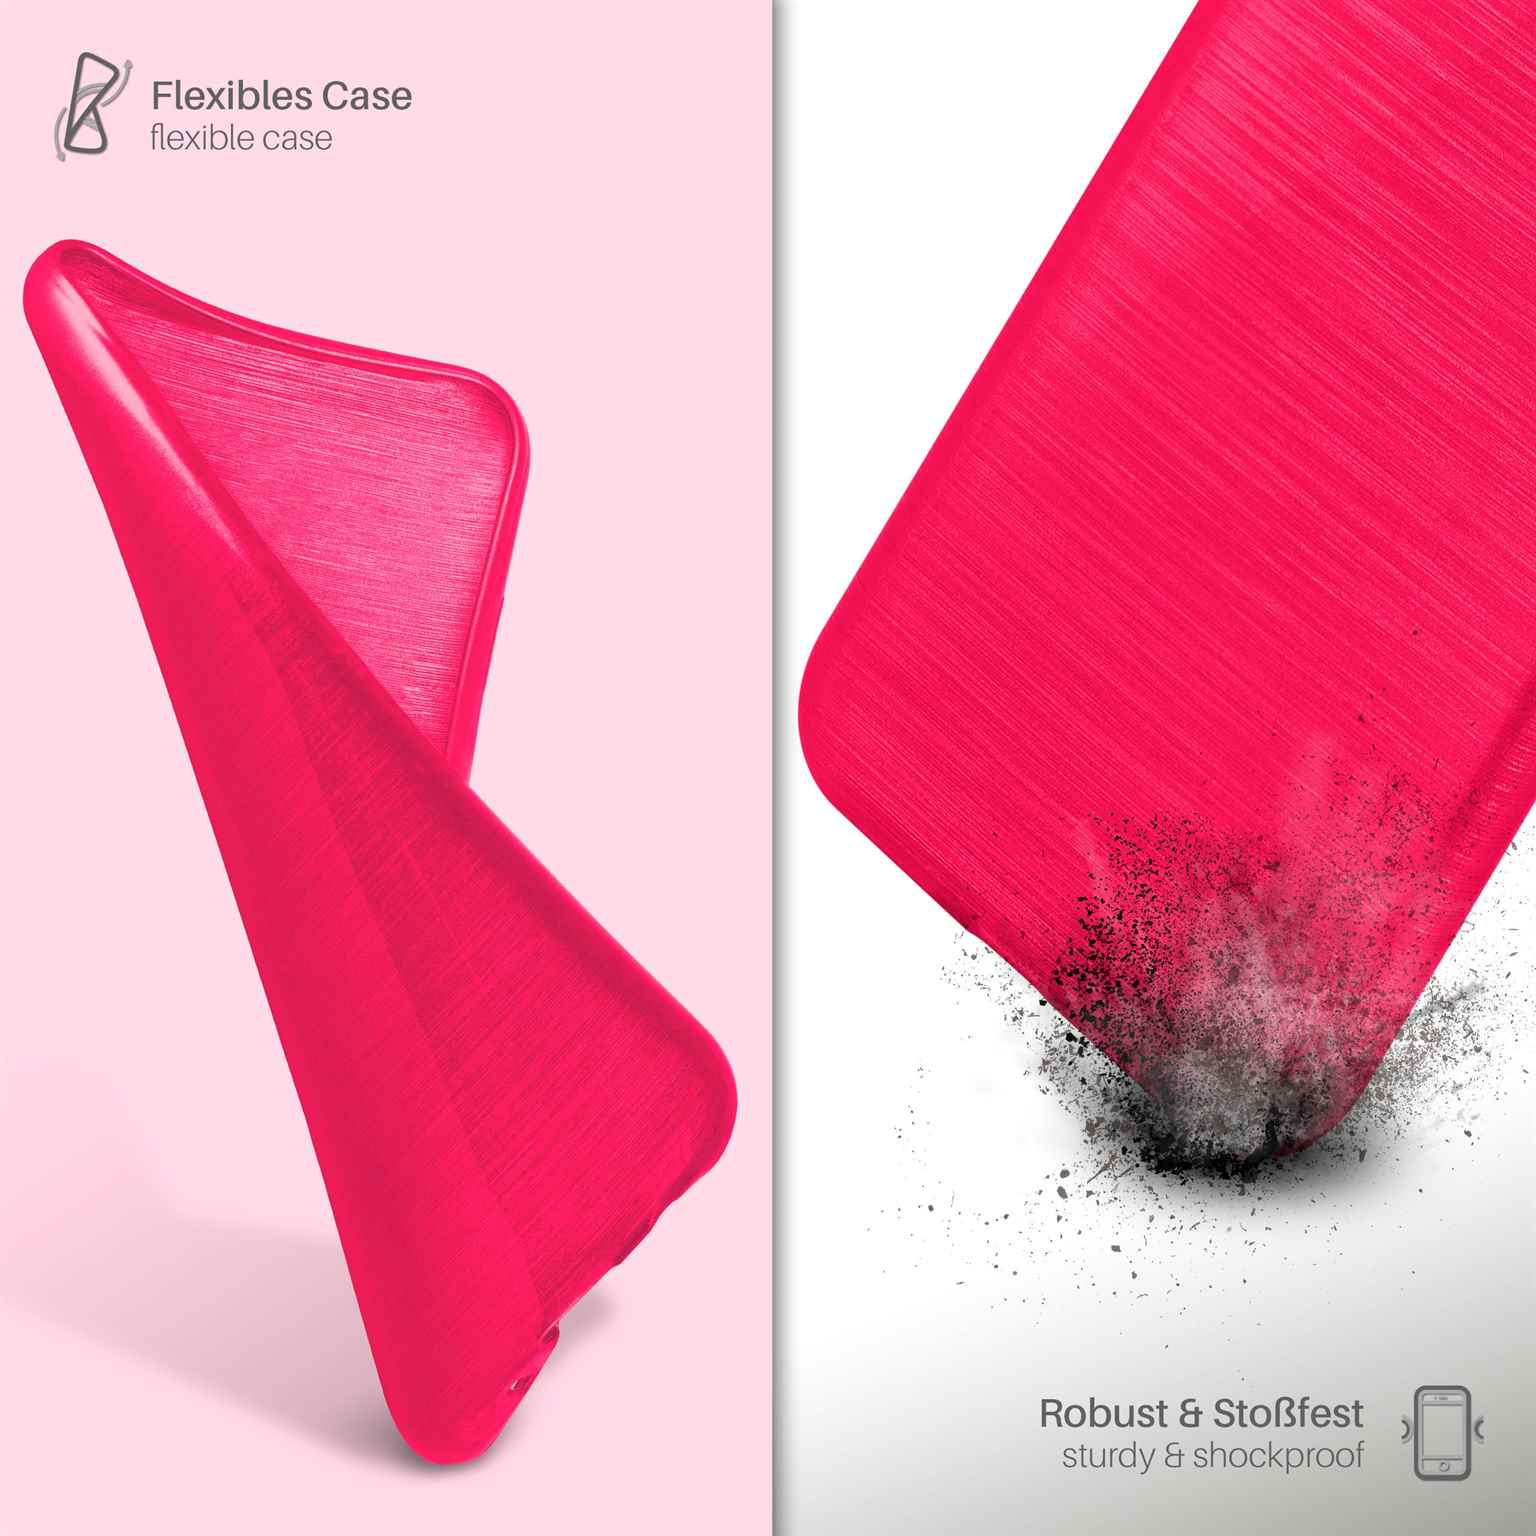 MOEX Brushed Case, S4, Samsung, Galaxy Backcover, Magenta-Pink